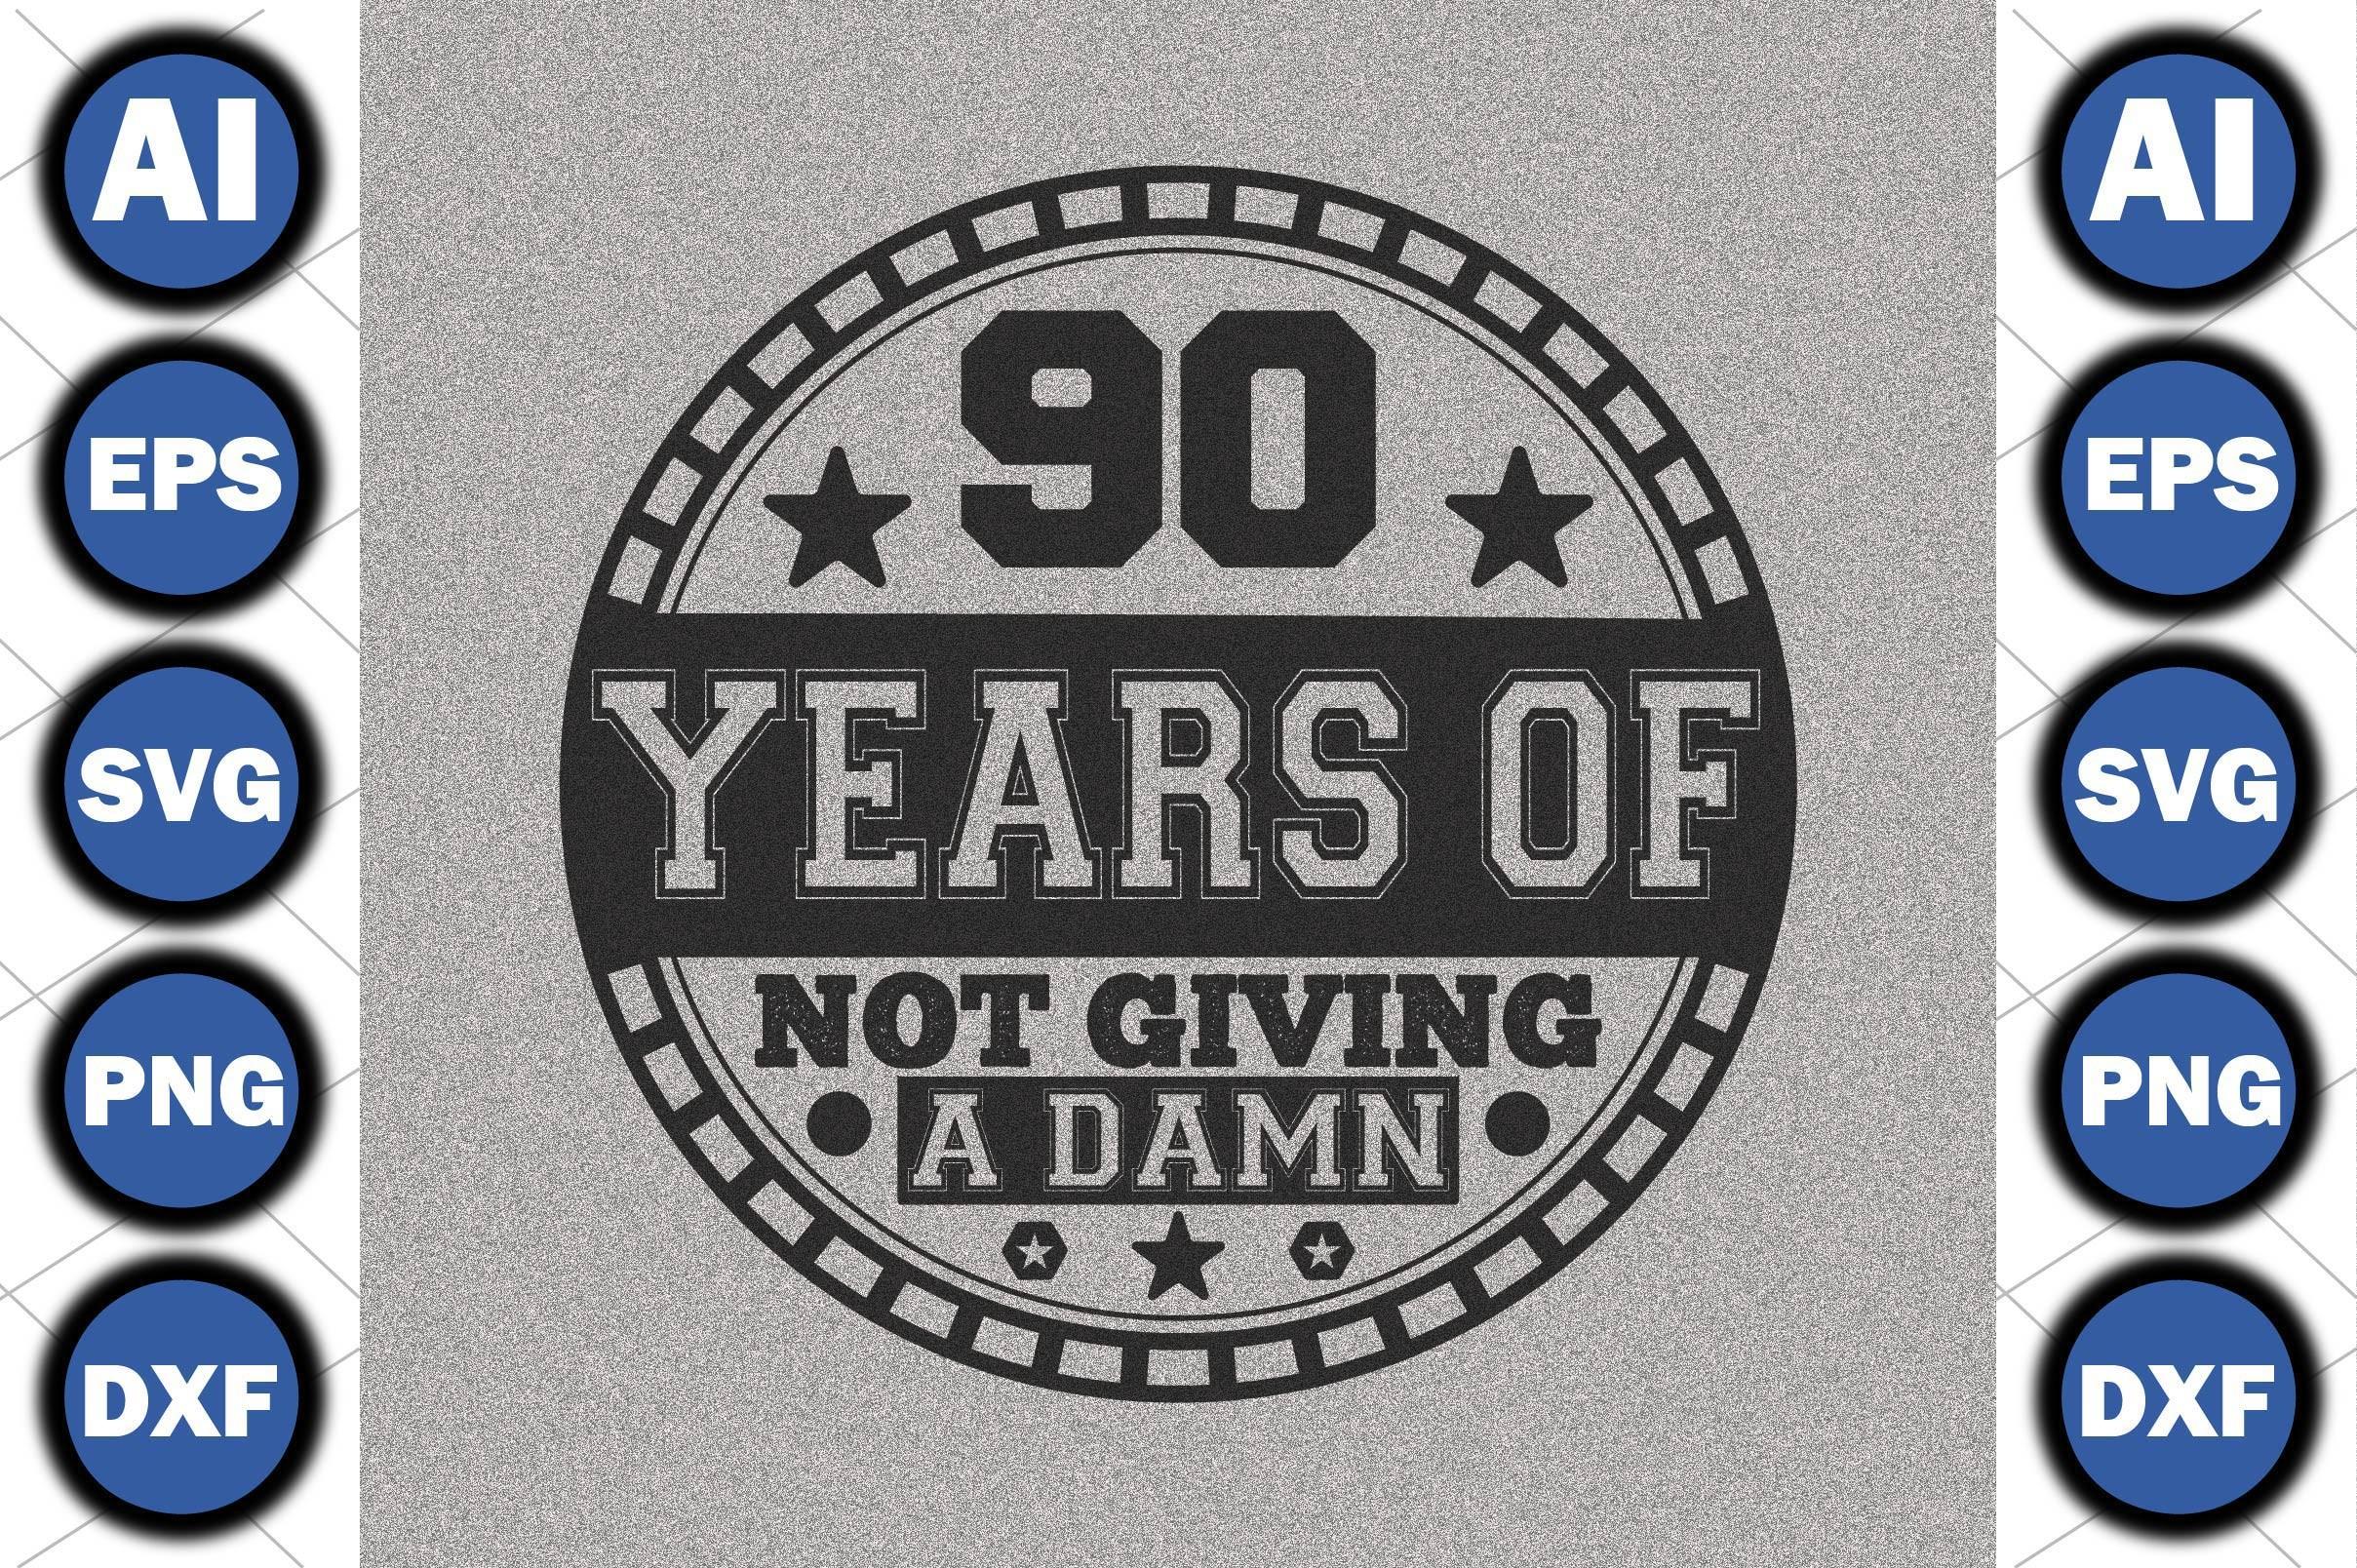 90 Years of Not Giving a Damn